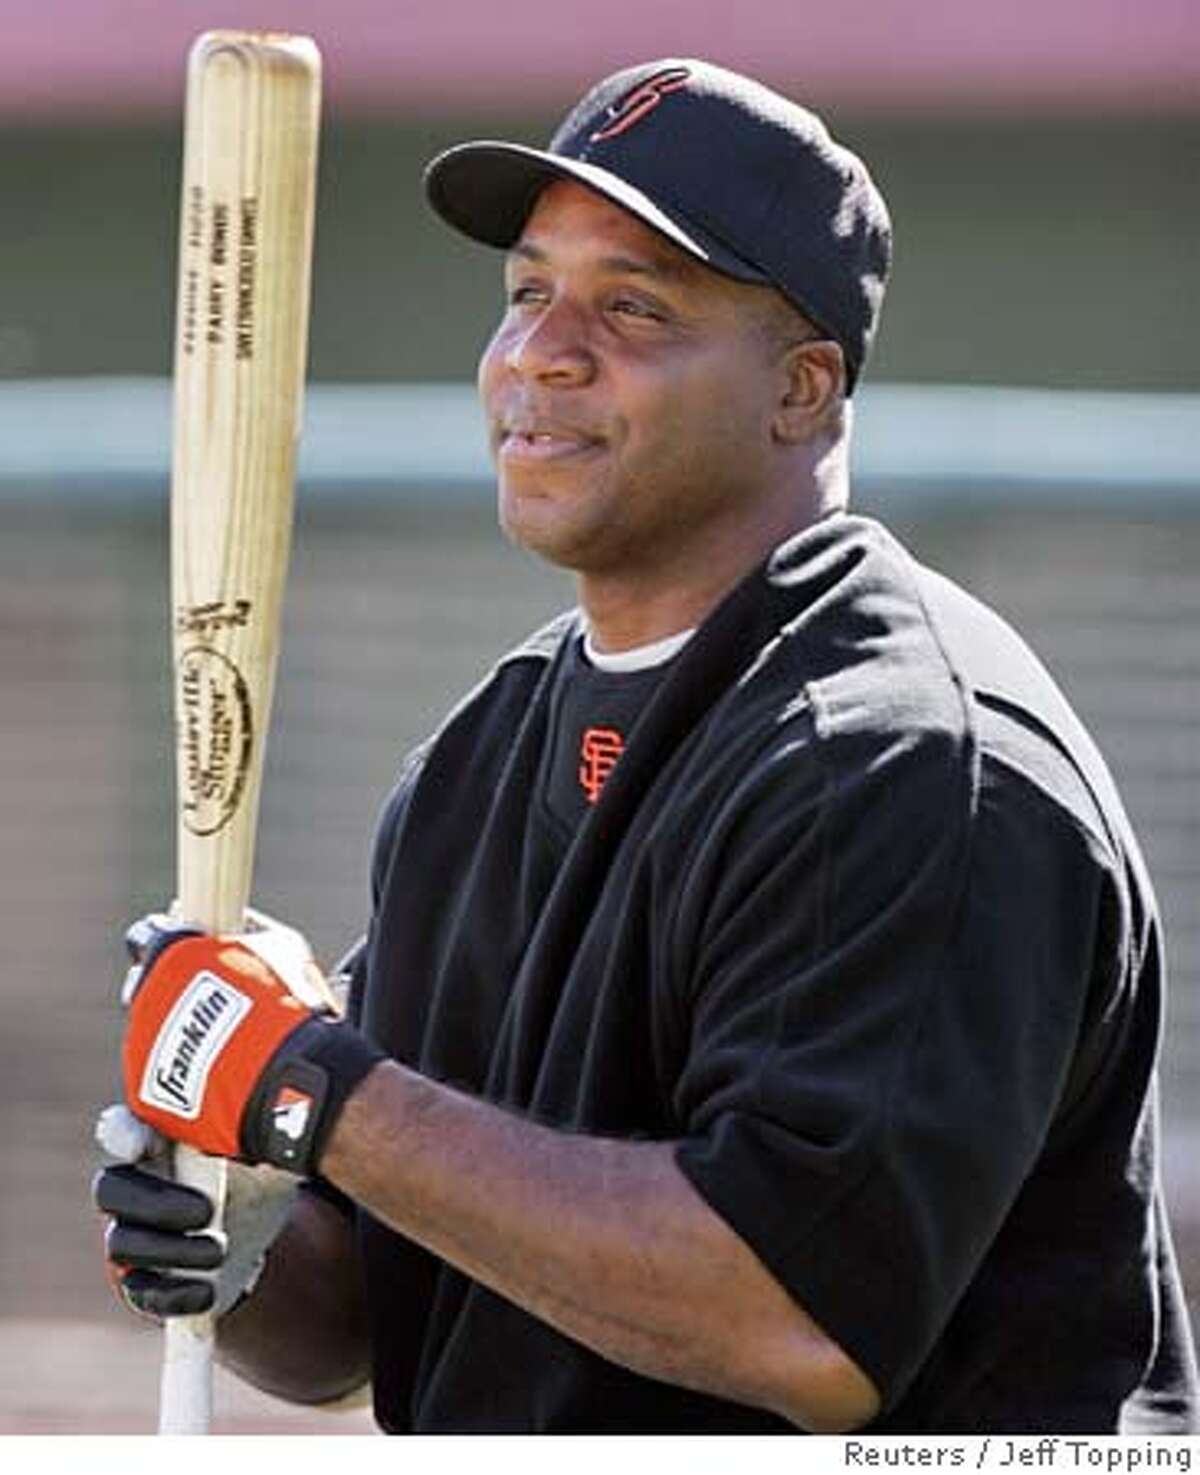 San Francisco Giants left fielder Barry Bond holds his bat waiting to hit at the team's spring training baseball camp in Scottsdale, Arizona, March 2, 2006. REUTERS/Jeff Topping